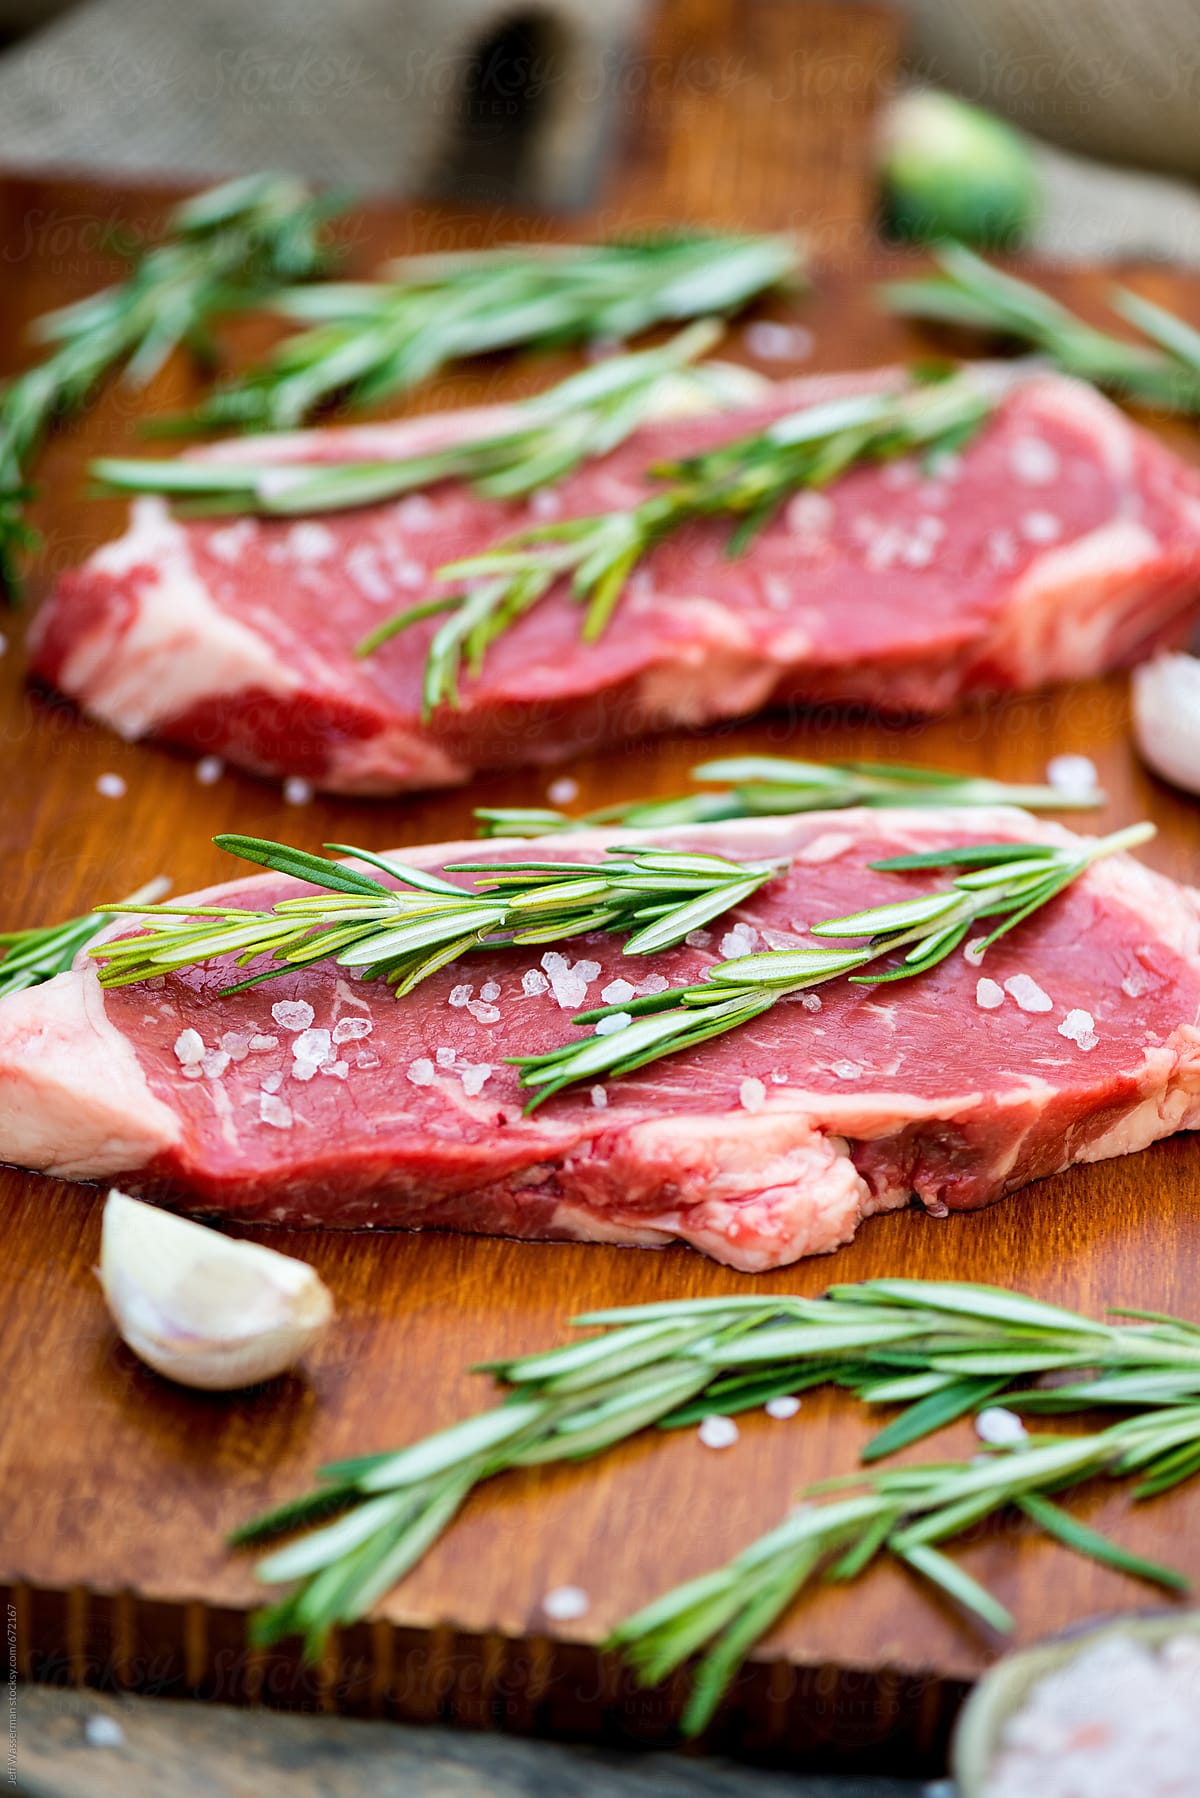 Two Raw Sirloin Steaks with Rosemary